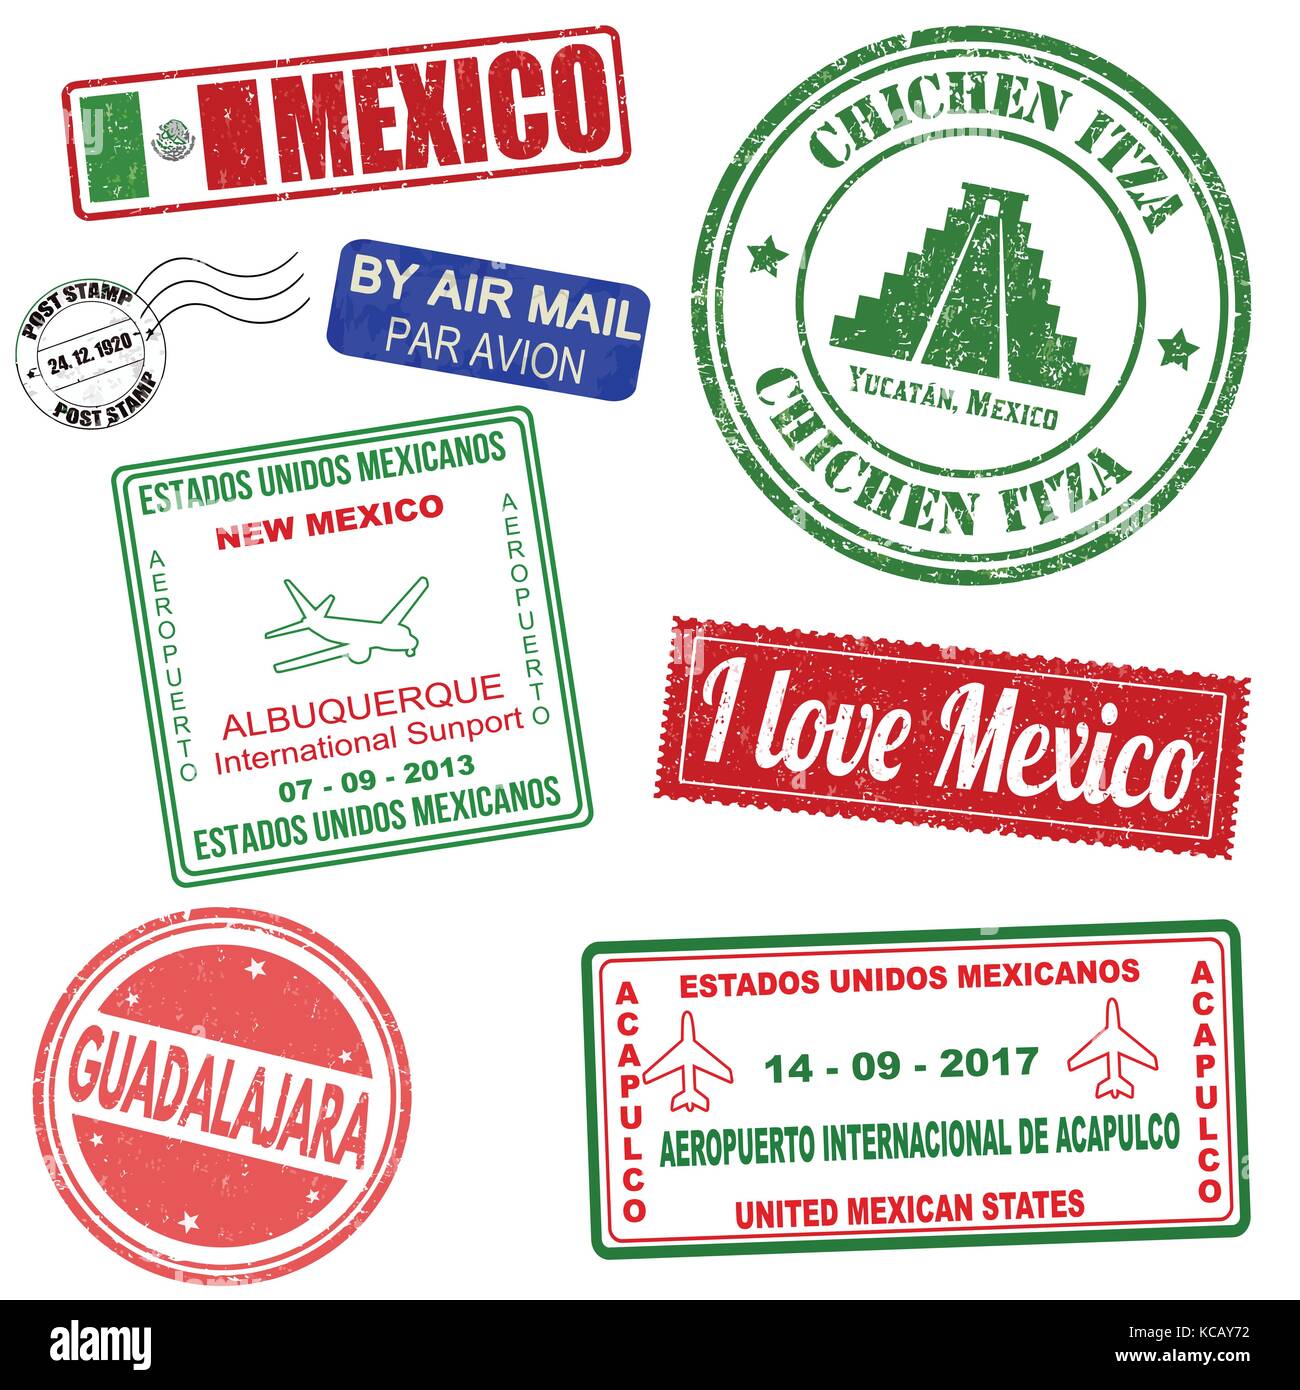 Passport or travel set of grunge stamps from Mexico, vector illustration Stock Vector